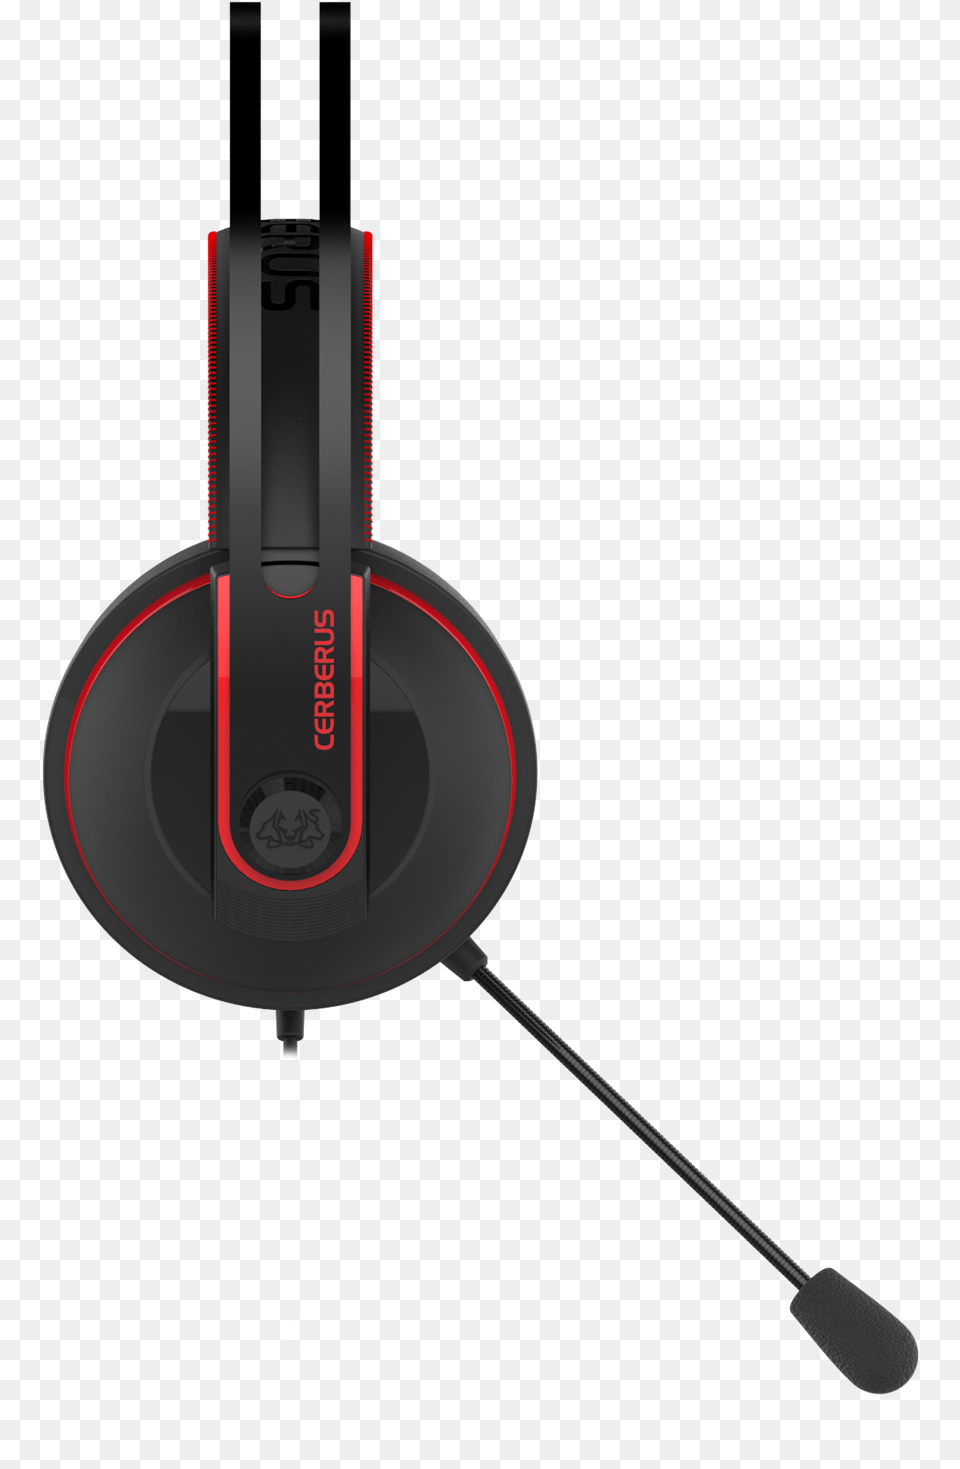 Cerberus V2 Gaming Headset Red Side Asus Cerberus V2 Green, Electrical Device, Electronics, Microphone, Hardware Free Transparent Png